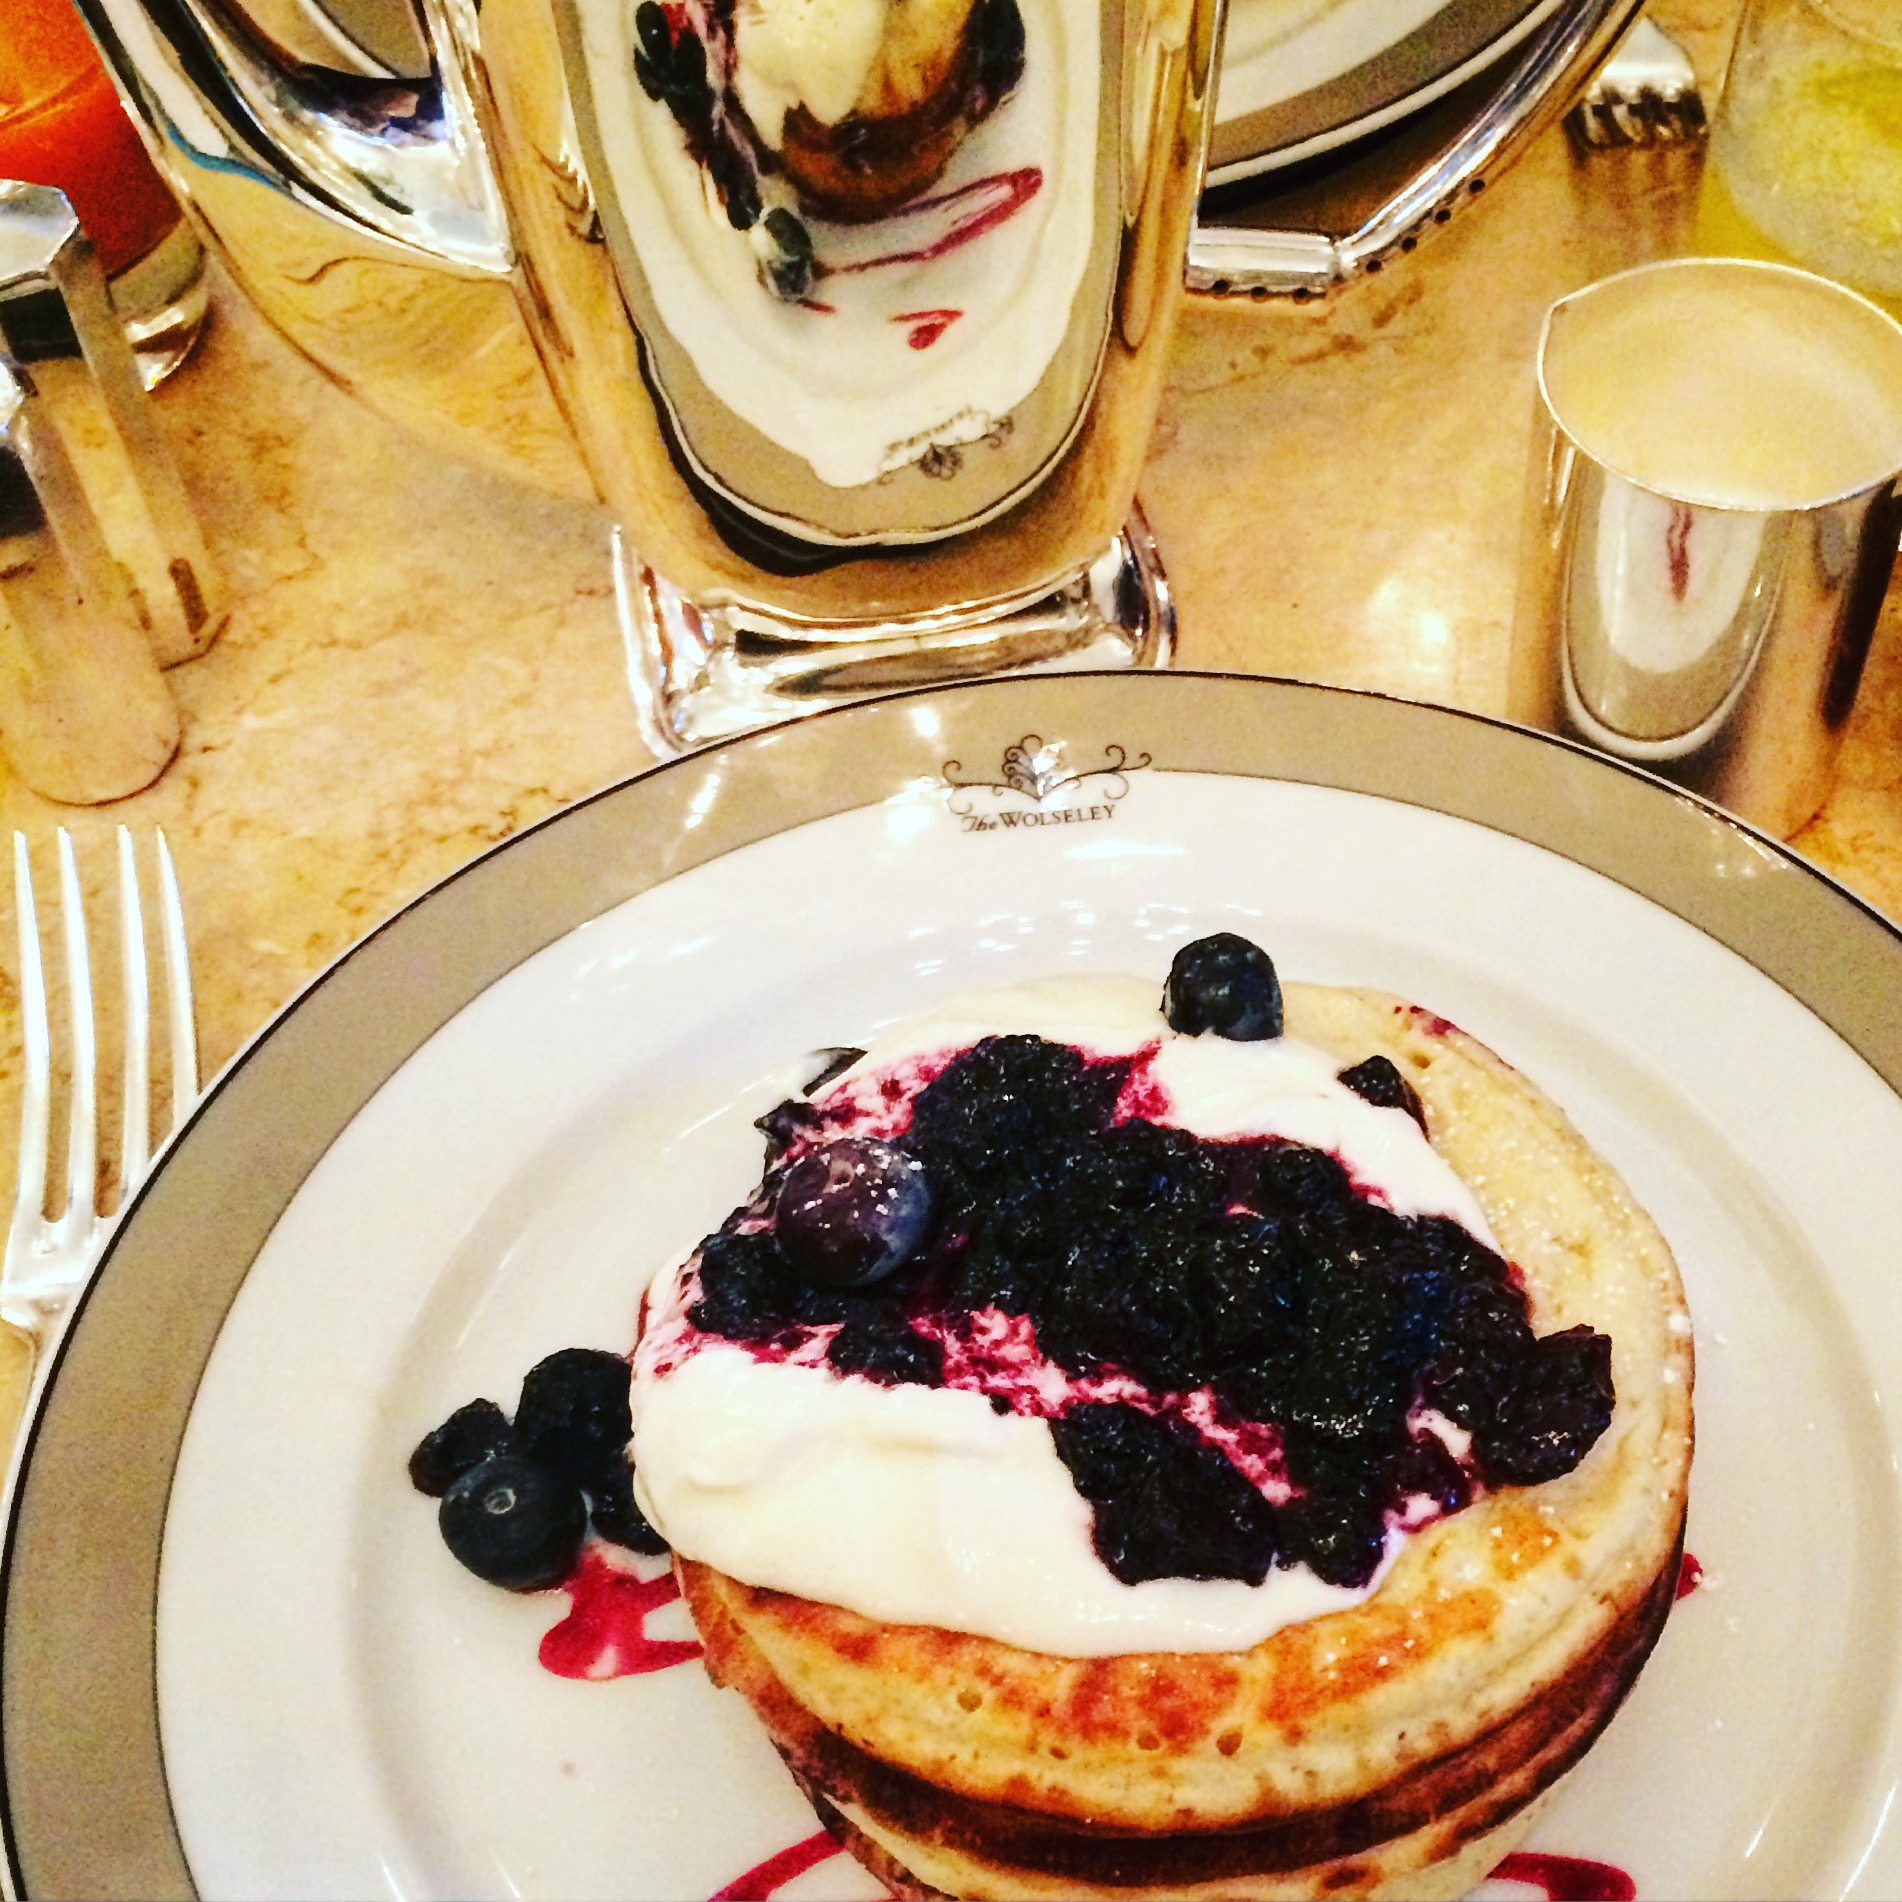 Pancakes with berries at luxury london breakfast spot The Wolseley